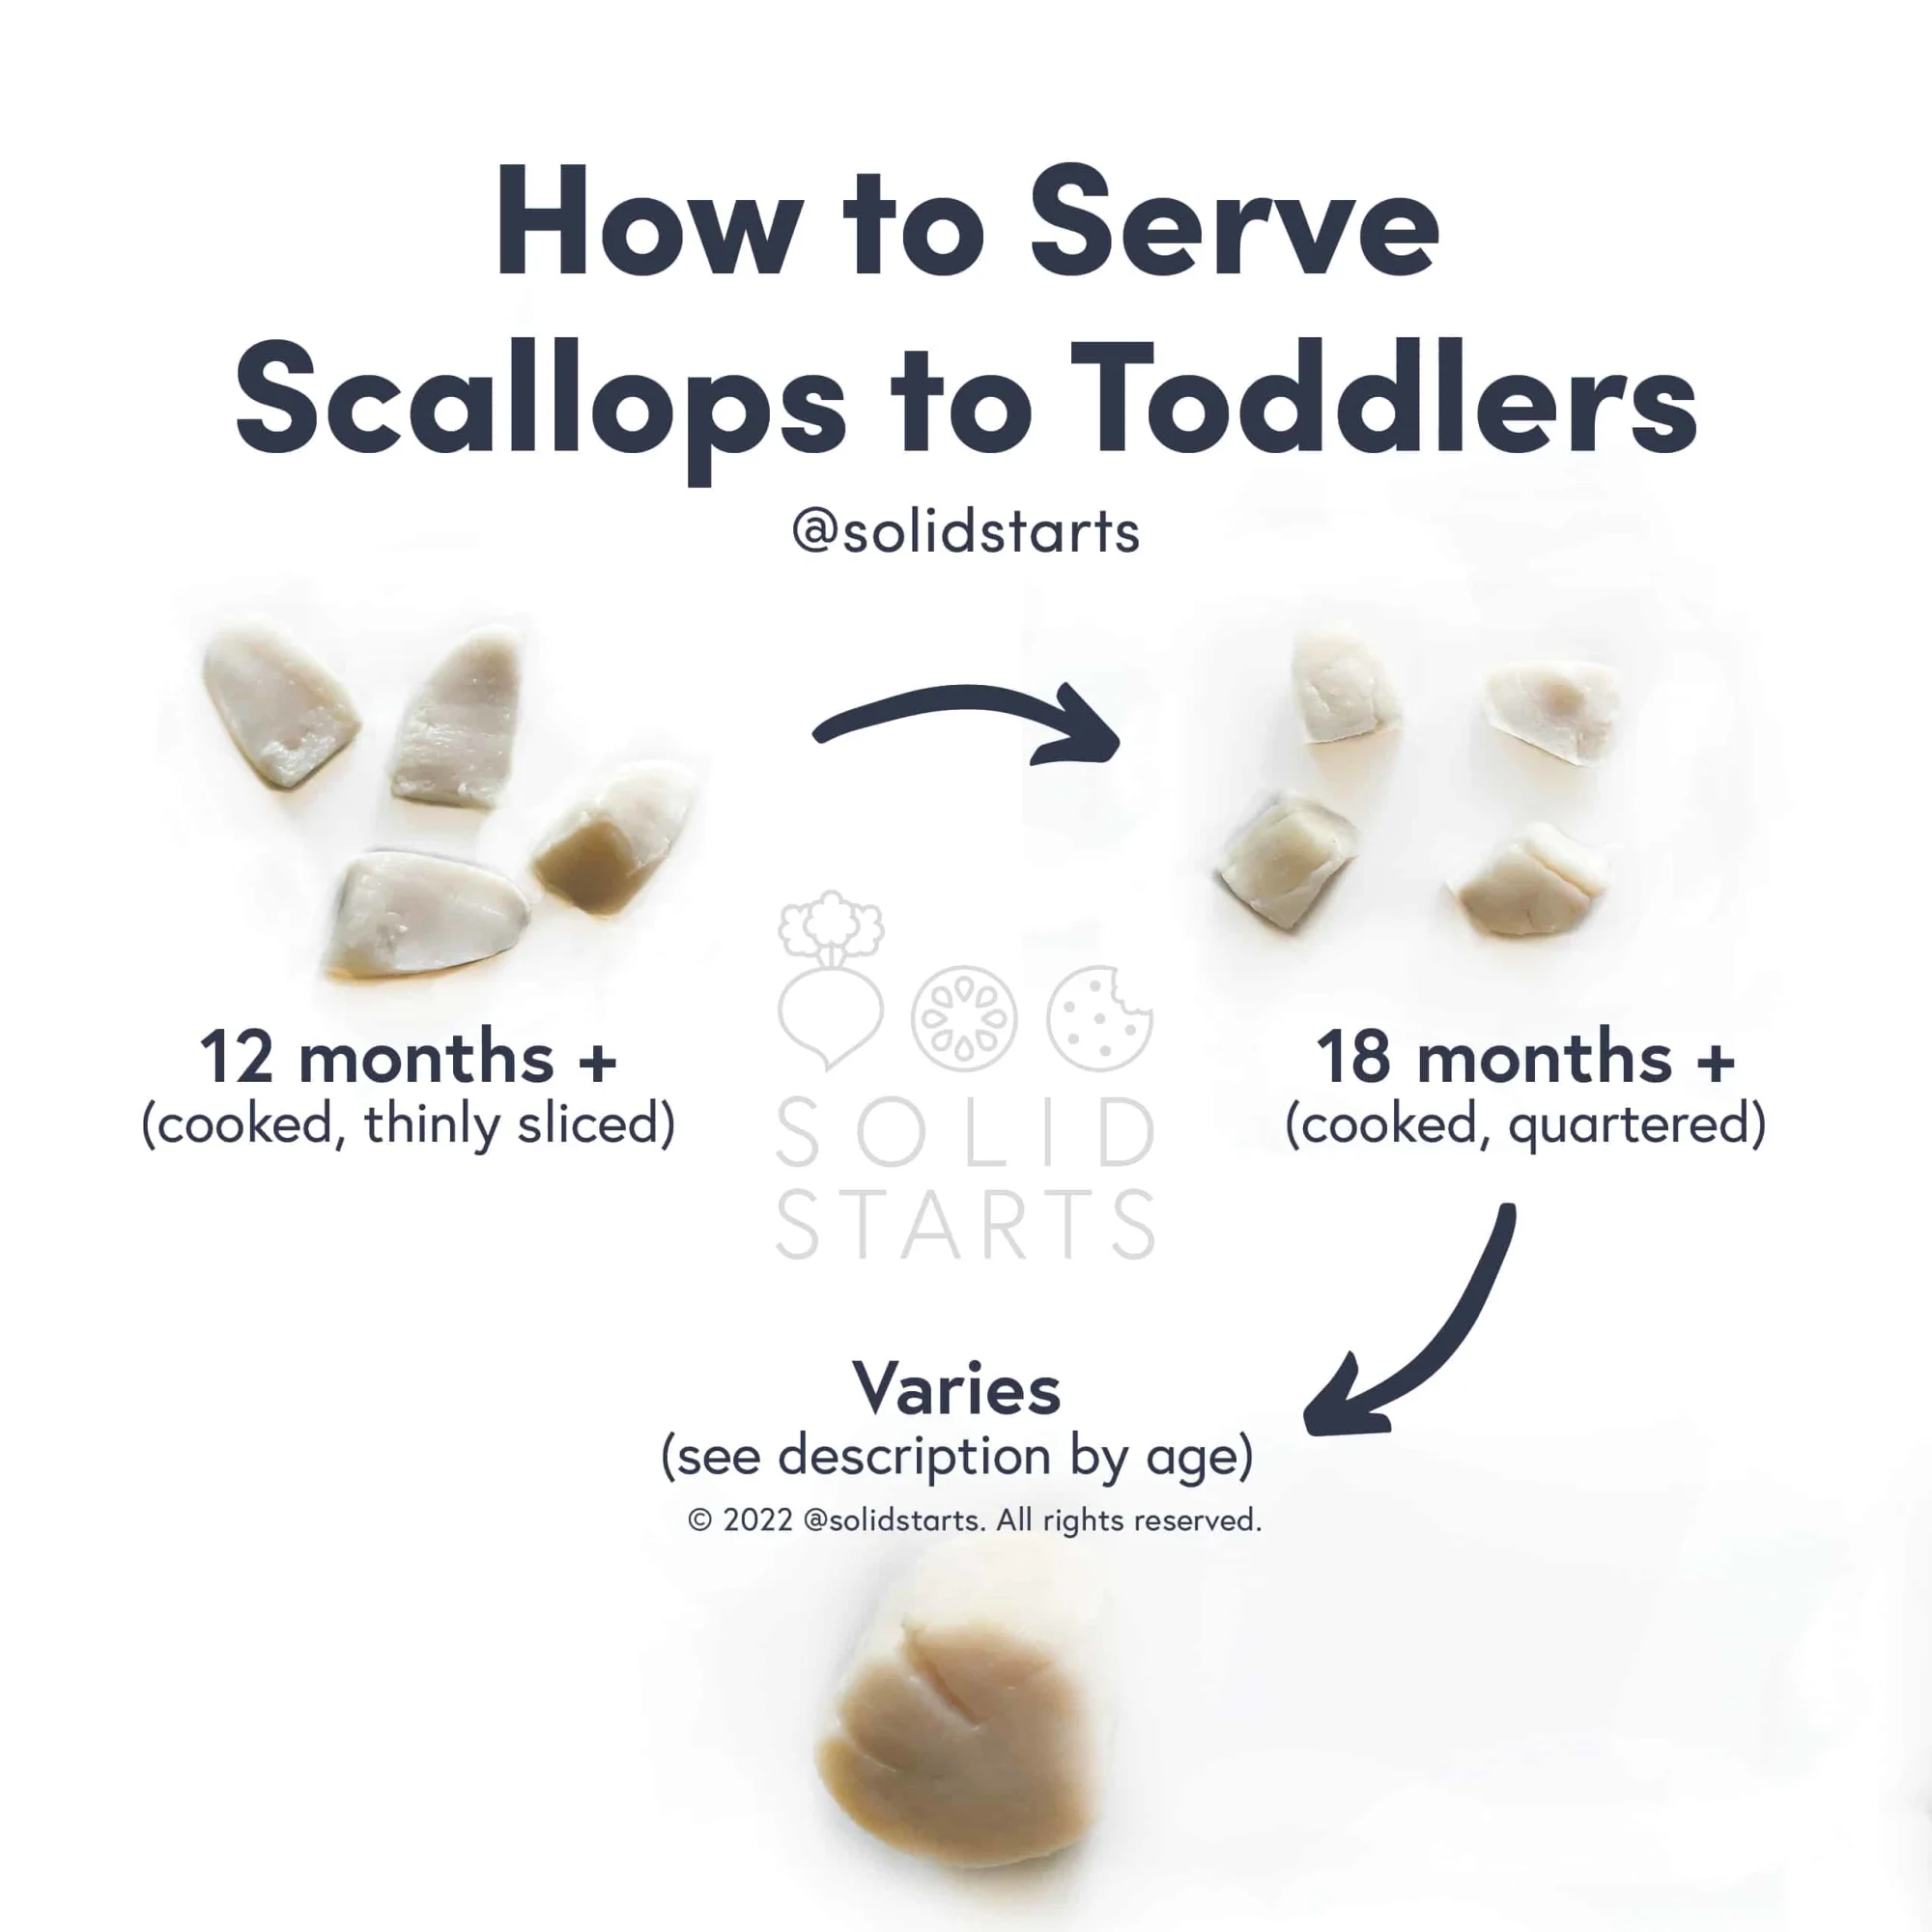 A Solid Starts infographic with the header How to Serve Scallops to Toddlers: thin cooked slices for 12 months+, cooked bite-size pieces for 18 mos+, and varies for whole cooked scallops